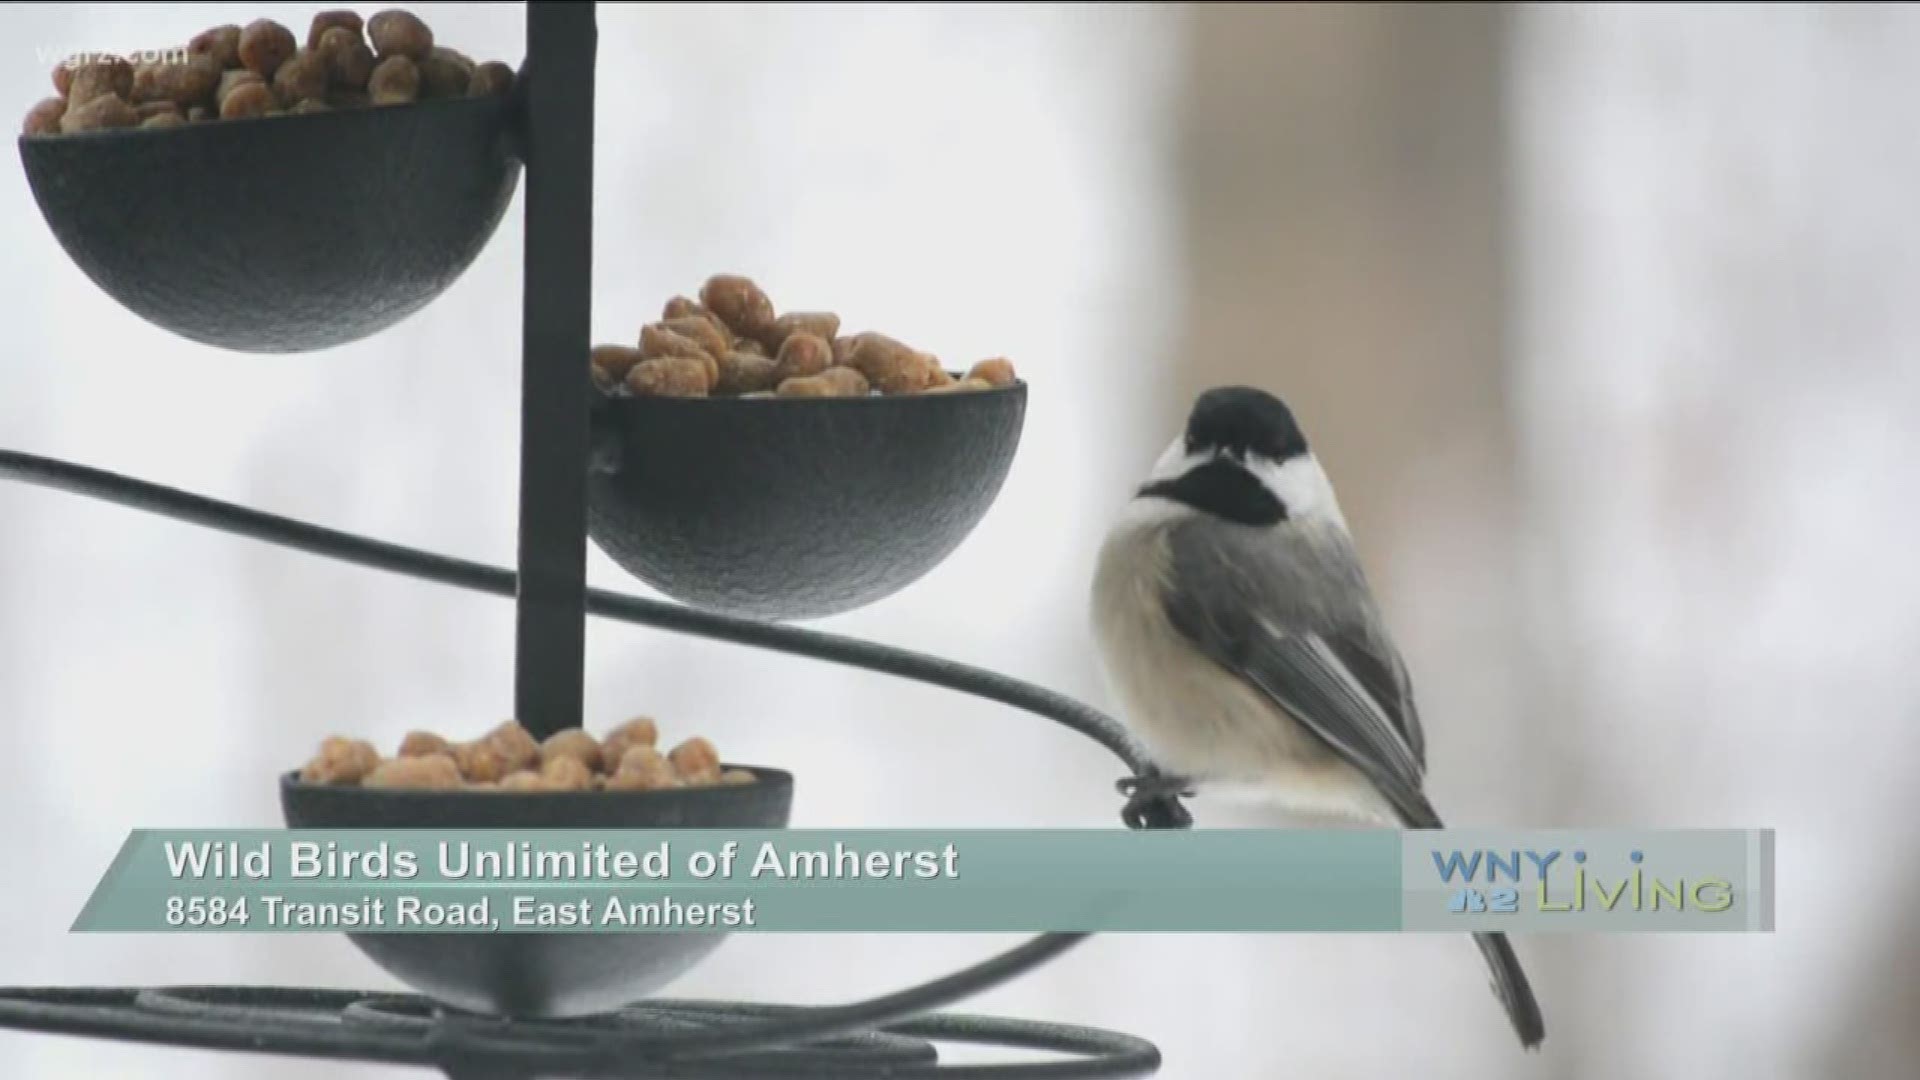 December 7 - Wild Birds Unlimited (THIS VIDEO IS SPONSORED BY WILD BIRDS UNLIMITED)